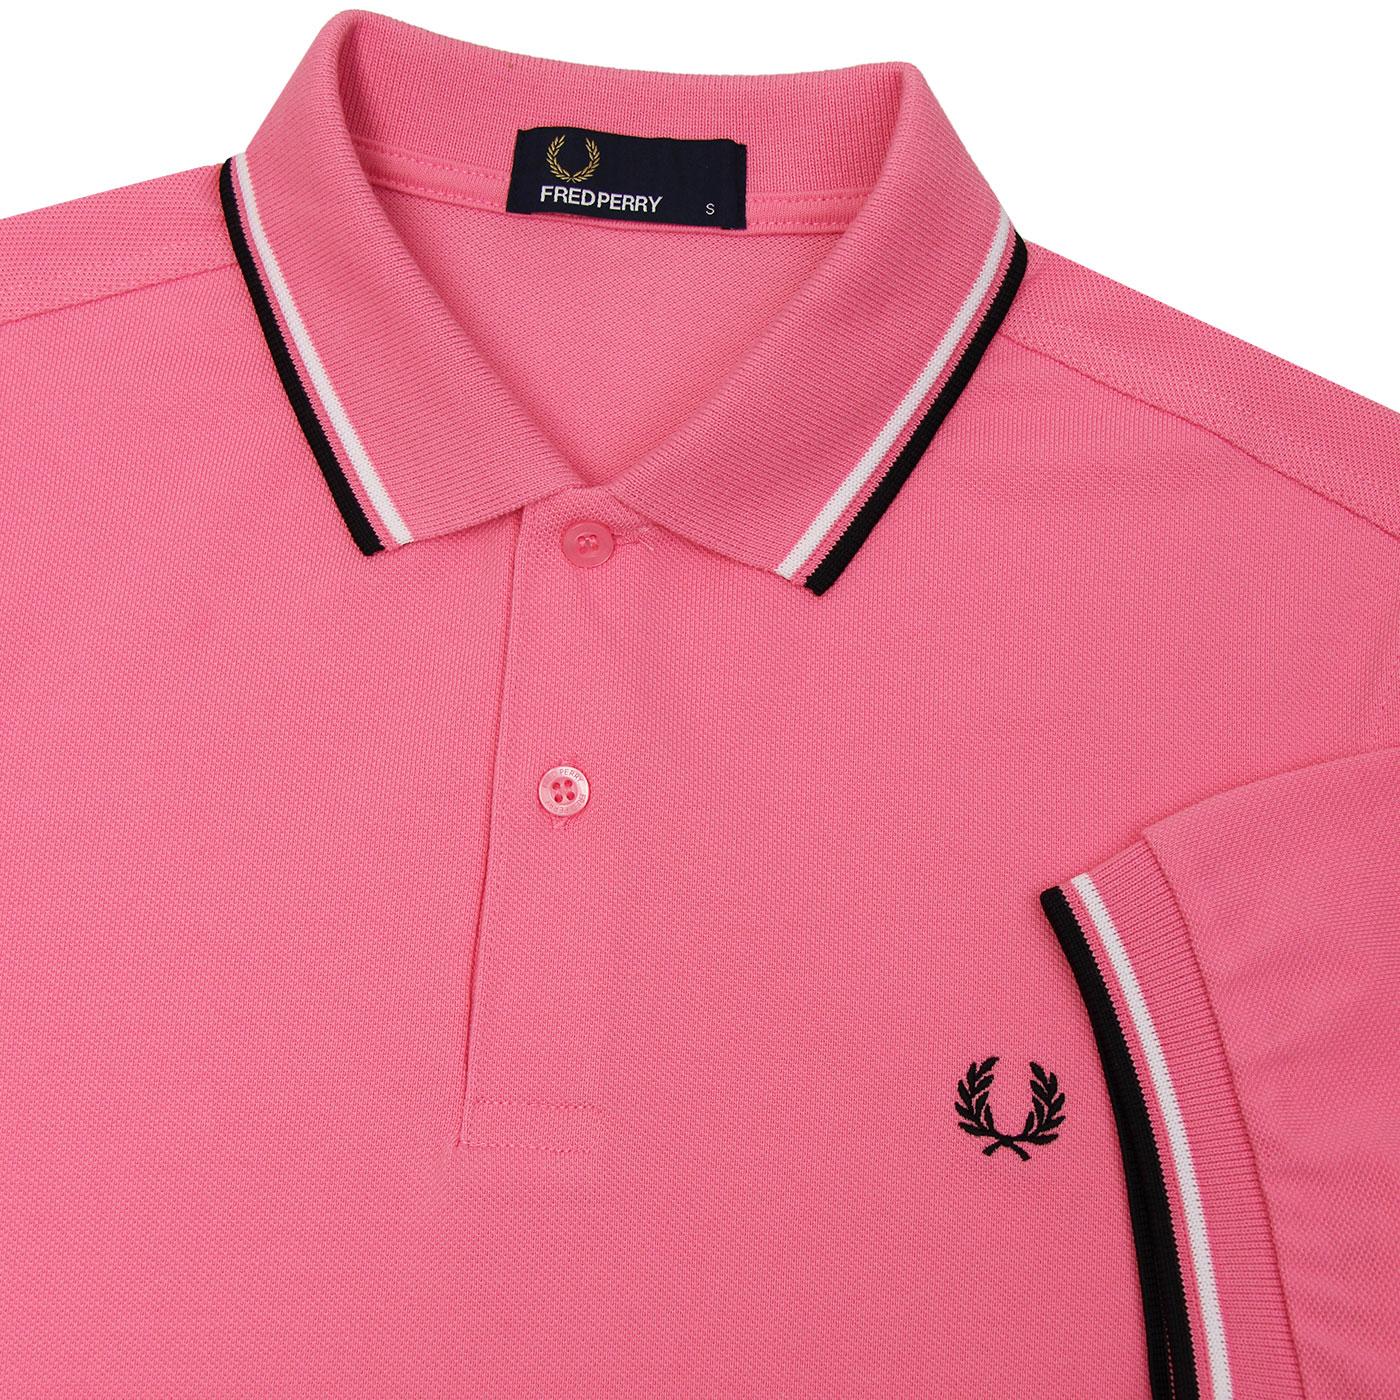 FRED PERRY M3600 Men's Mod Twin Tipped Polo Bright Pink